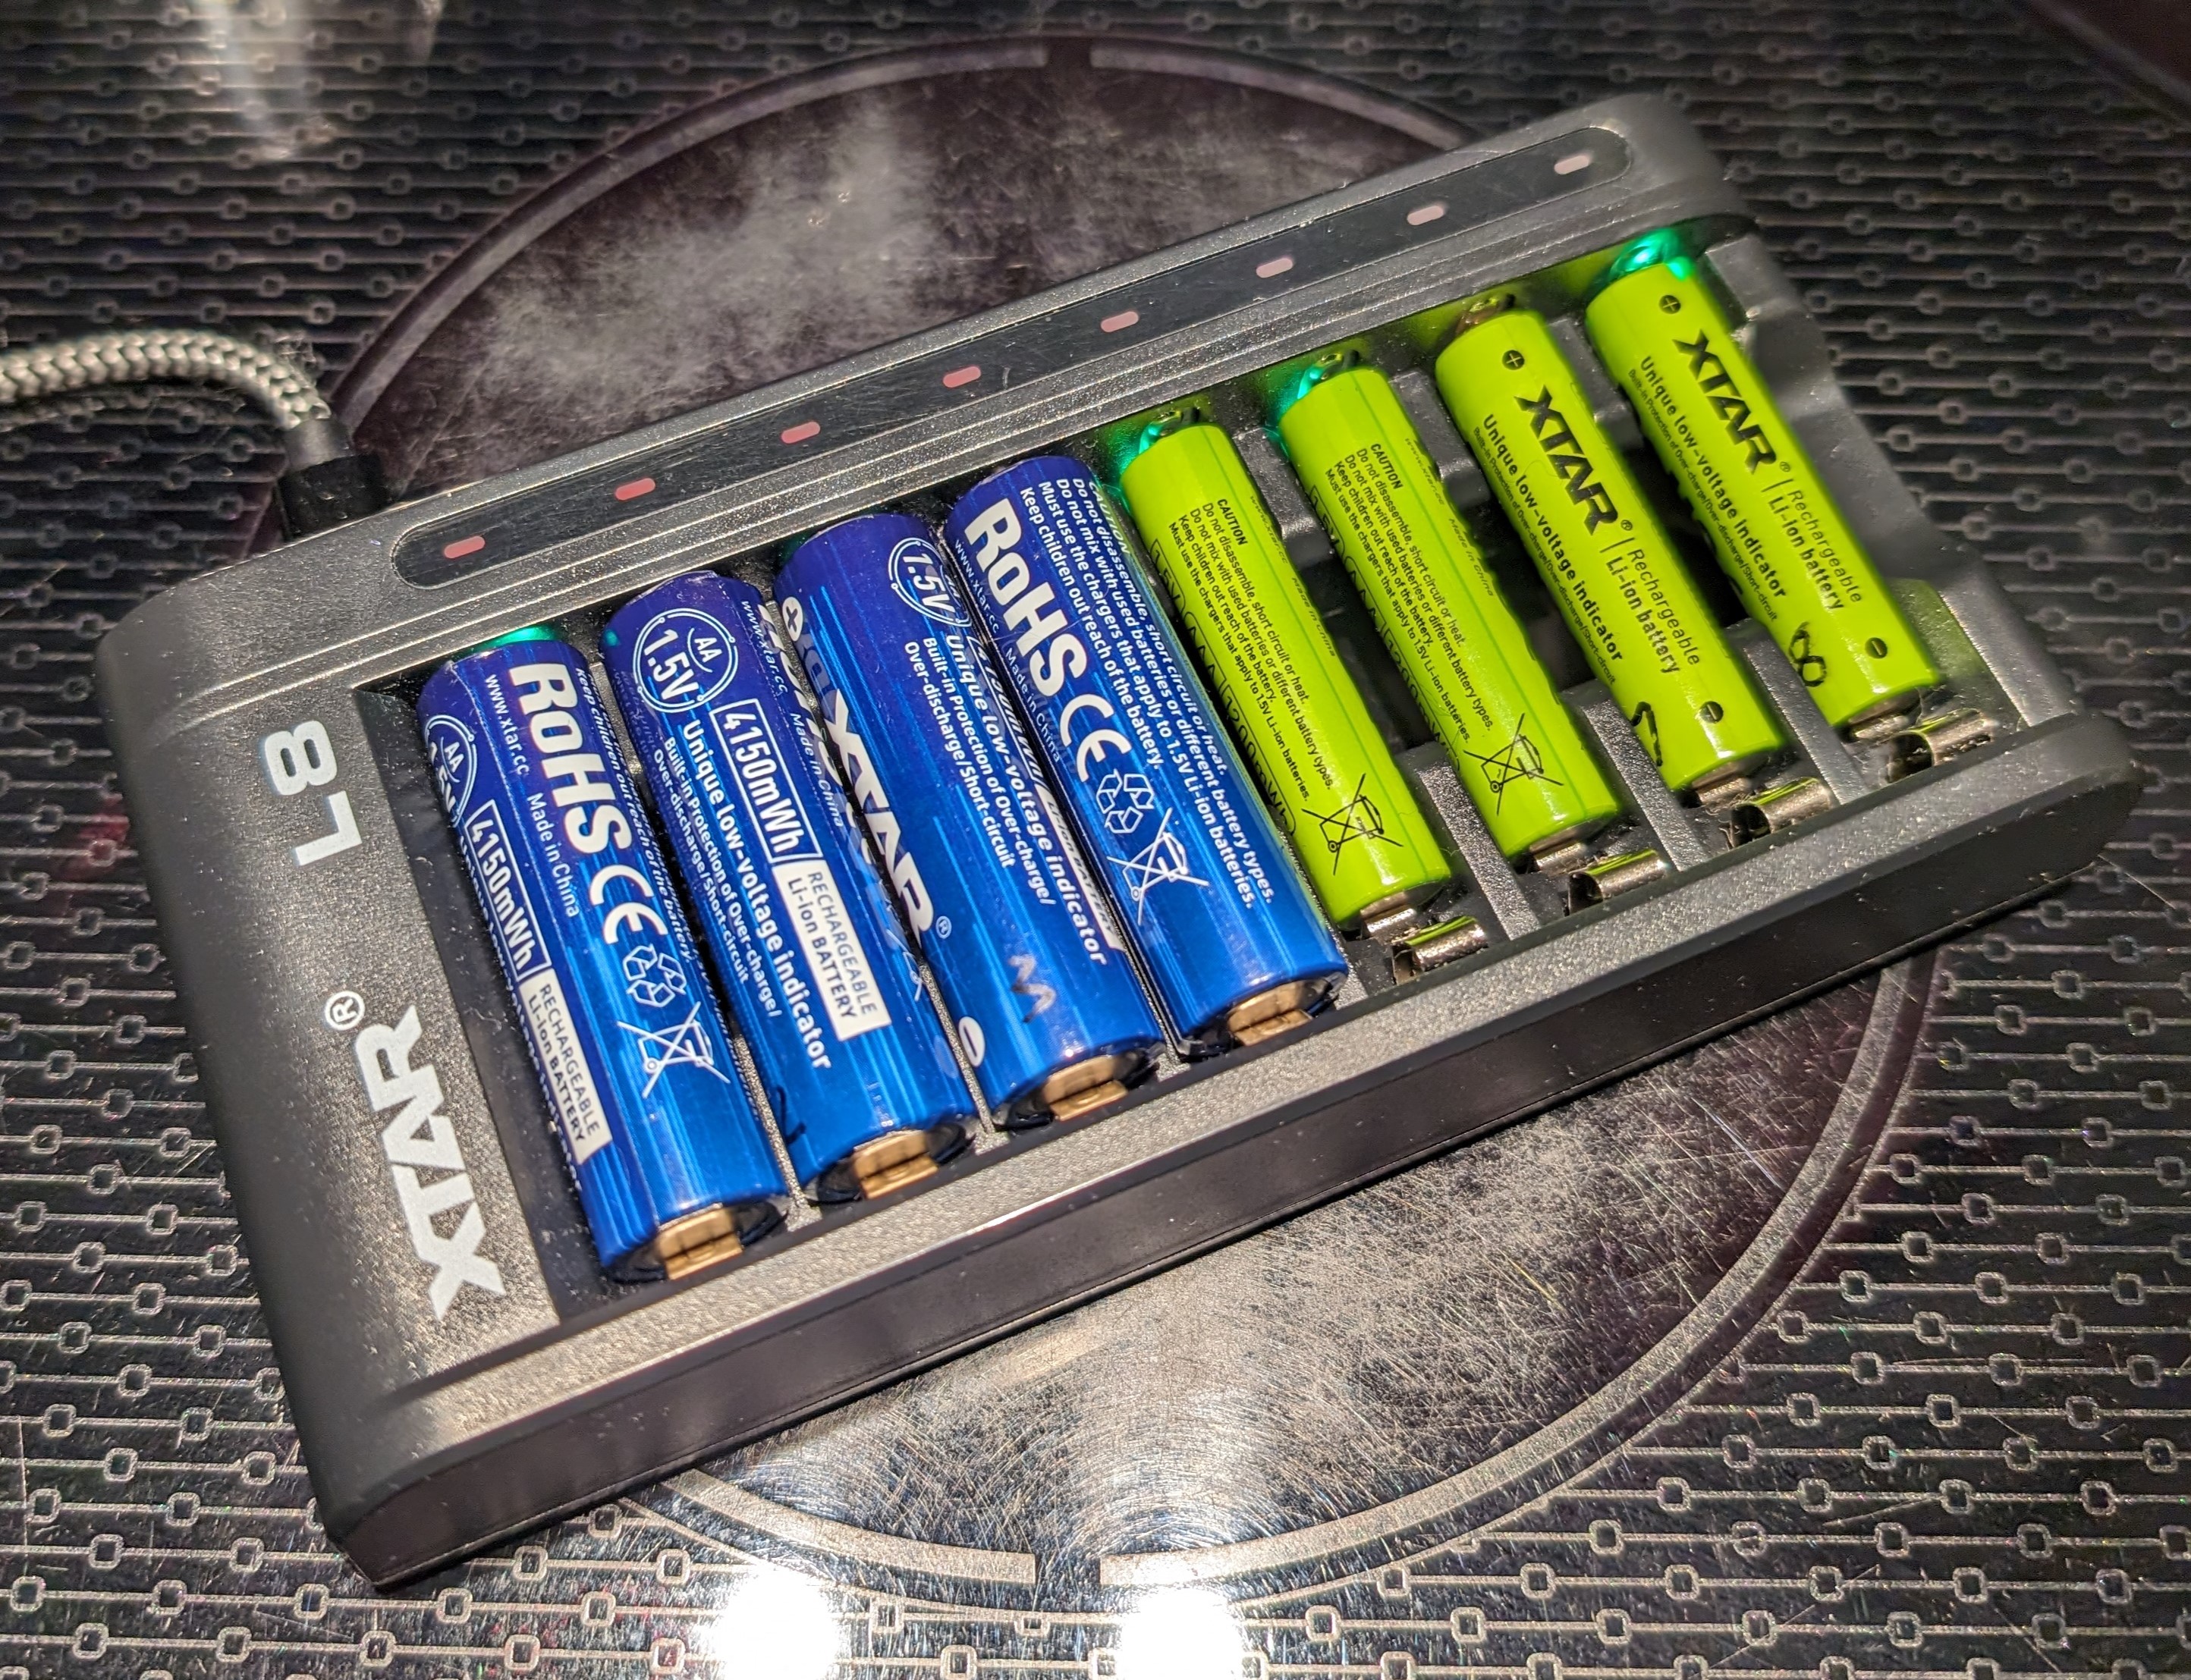 XTAR's 4150mWh AA, and 1200mWh AAA Li-ion batteries in an XTAR L8 USB-C charger.